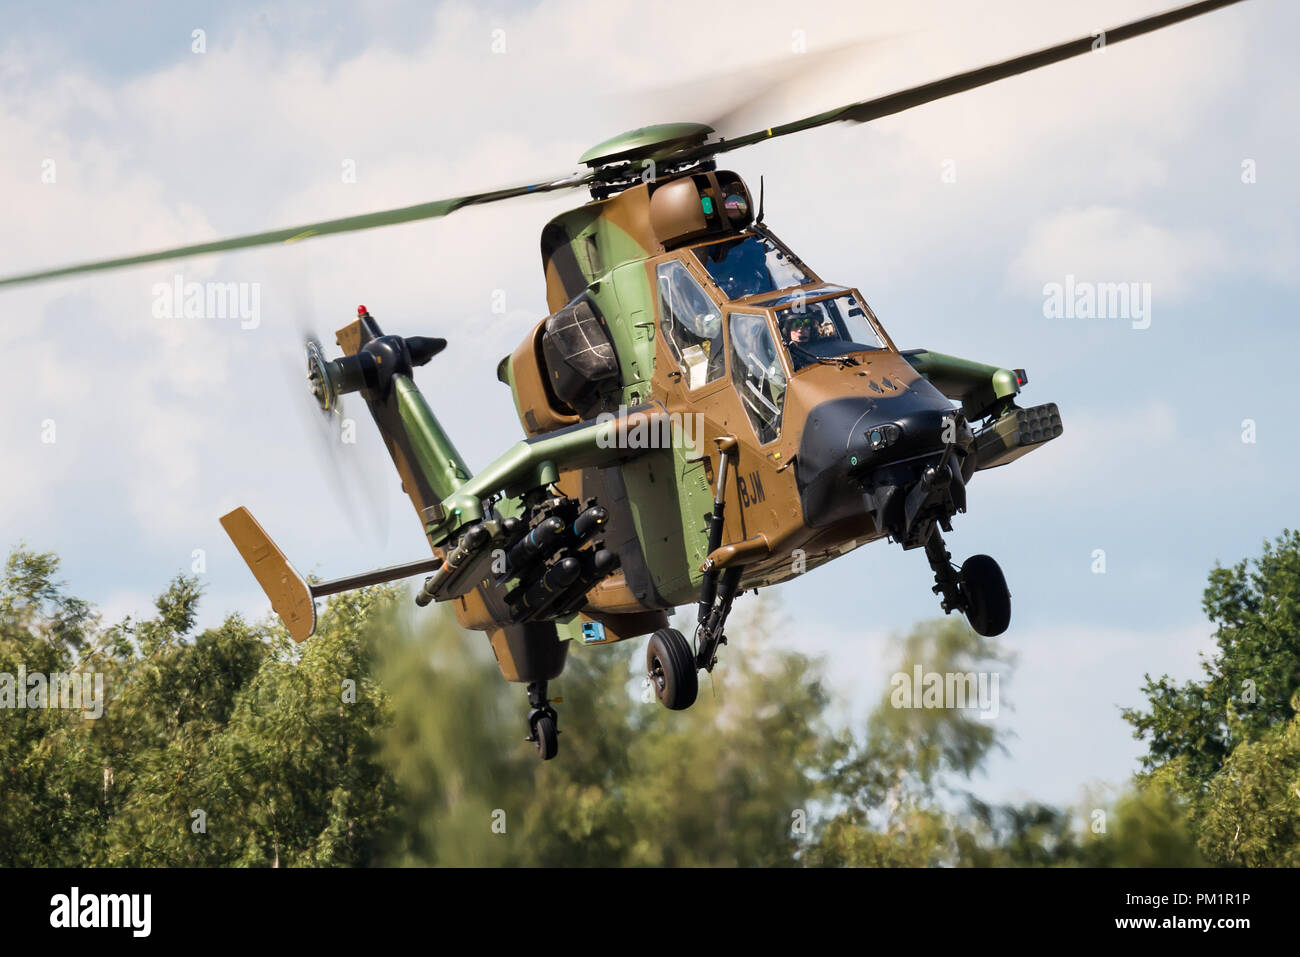 A Eurocopter Tiger four-bladed, twin-engined attack helicopter of the French Army at the Kleine-Brogel airbase in Belgium. Stock Photo